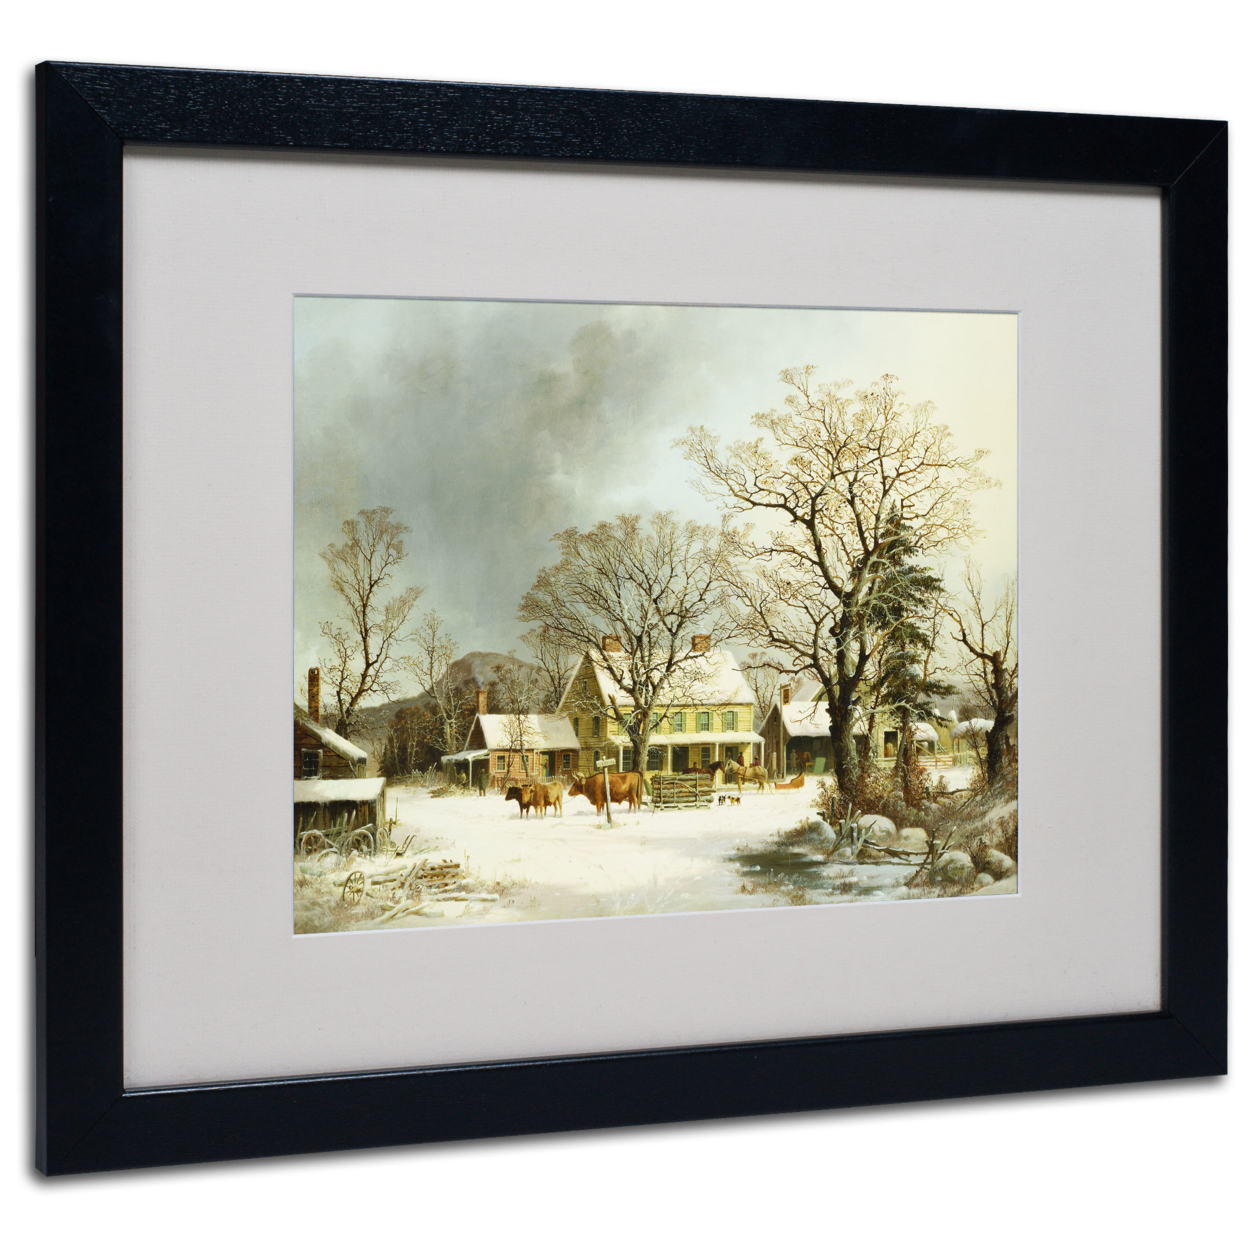 George Durie 'Seven Miles To Salem 1863' Black Wooden Framed Art 18 X 22 Inches